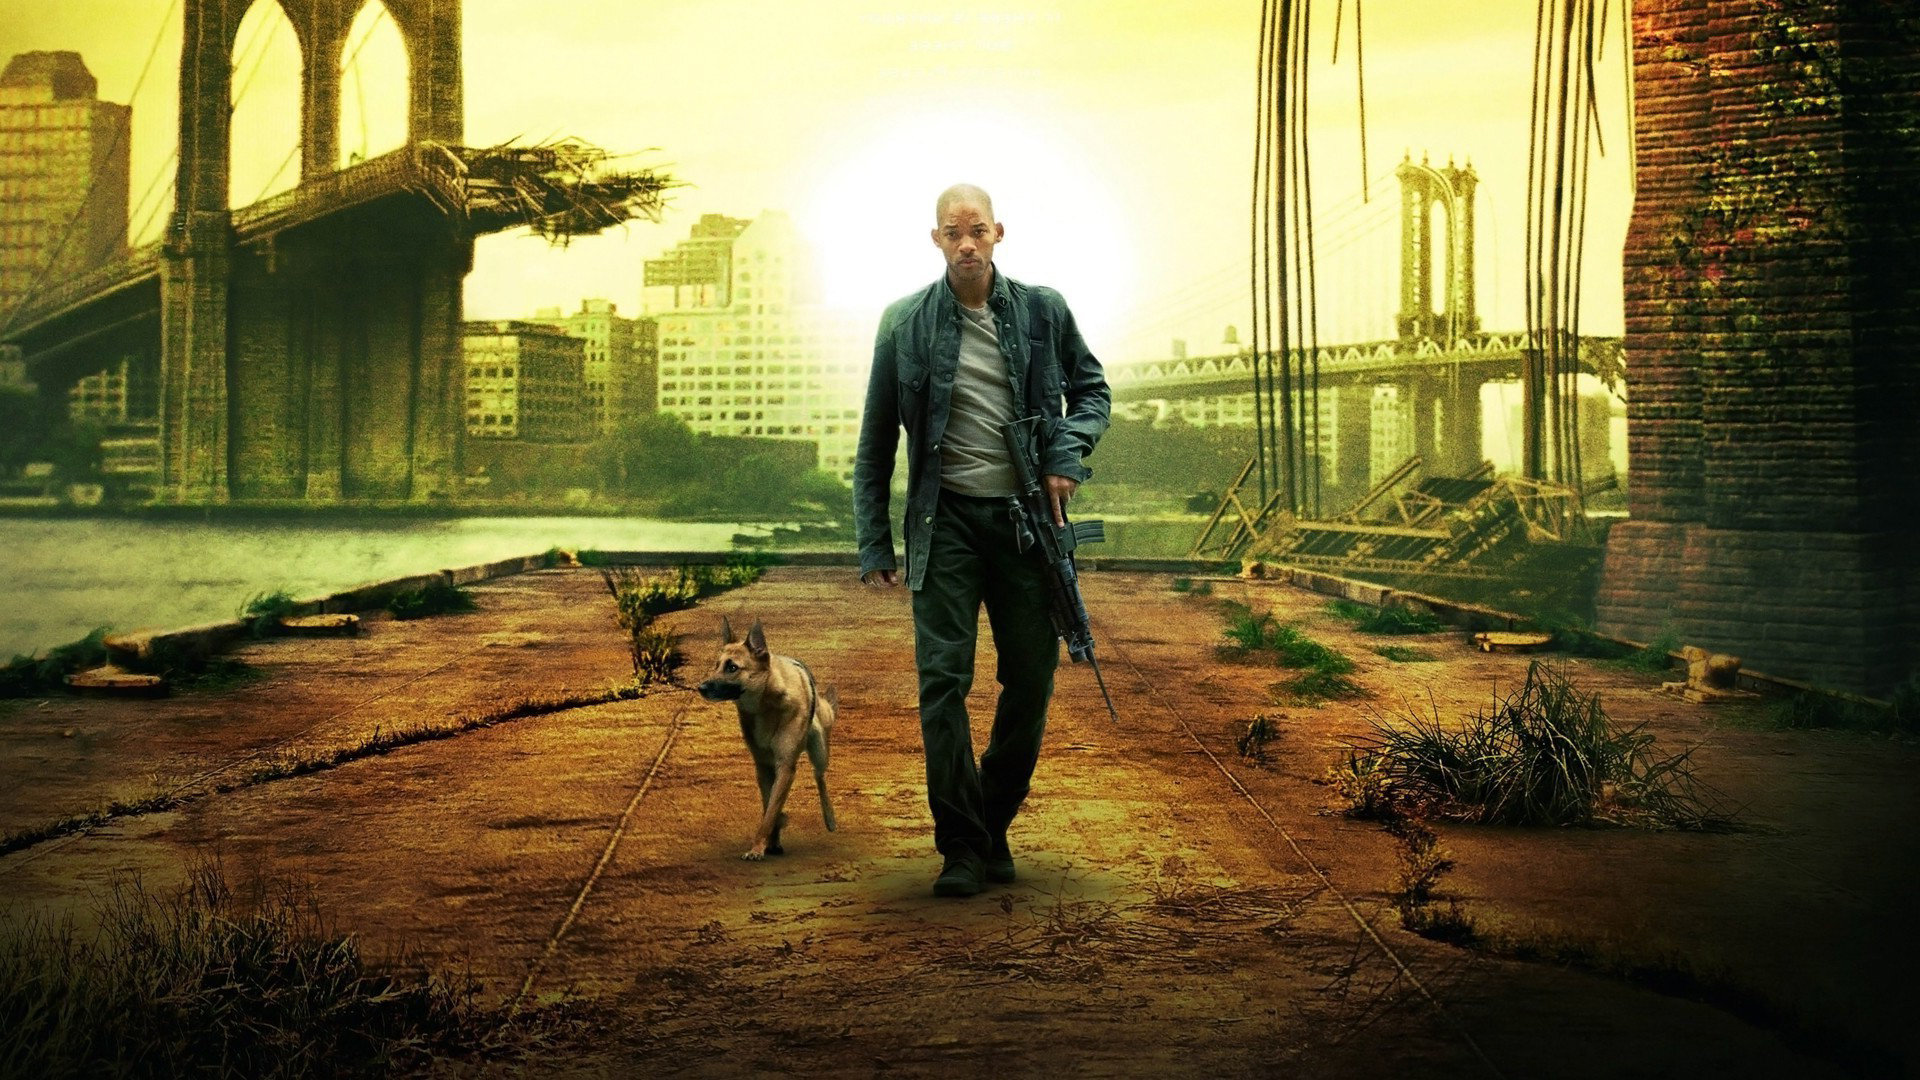 I am Legend has an alternative ending where Will Smith realizes the creatures just want the female back and have human feelings. When they take her back and leave peacefully Dr. Neville figures out they are just disfigured humans and he is a murderer.